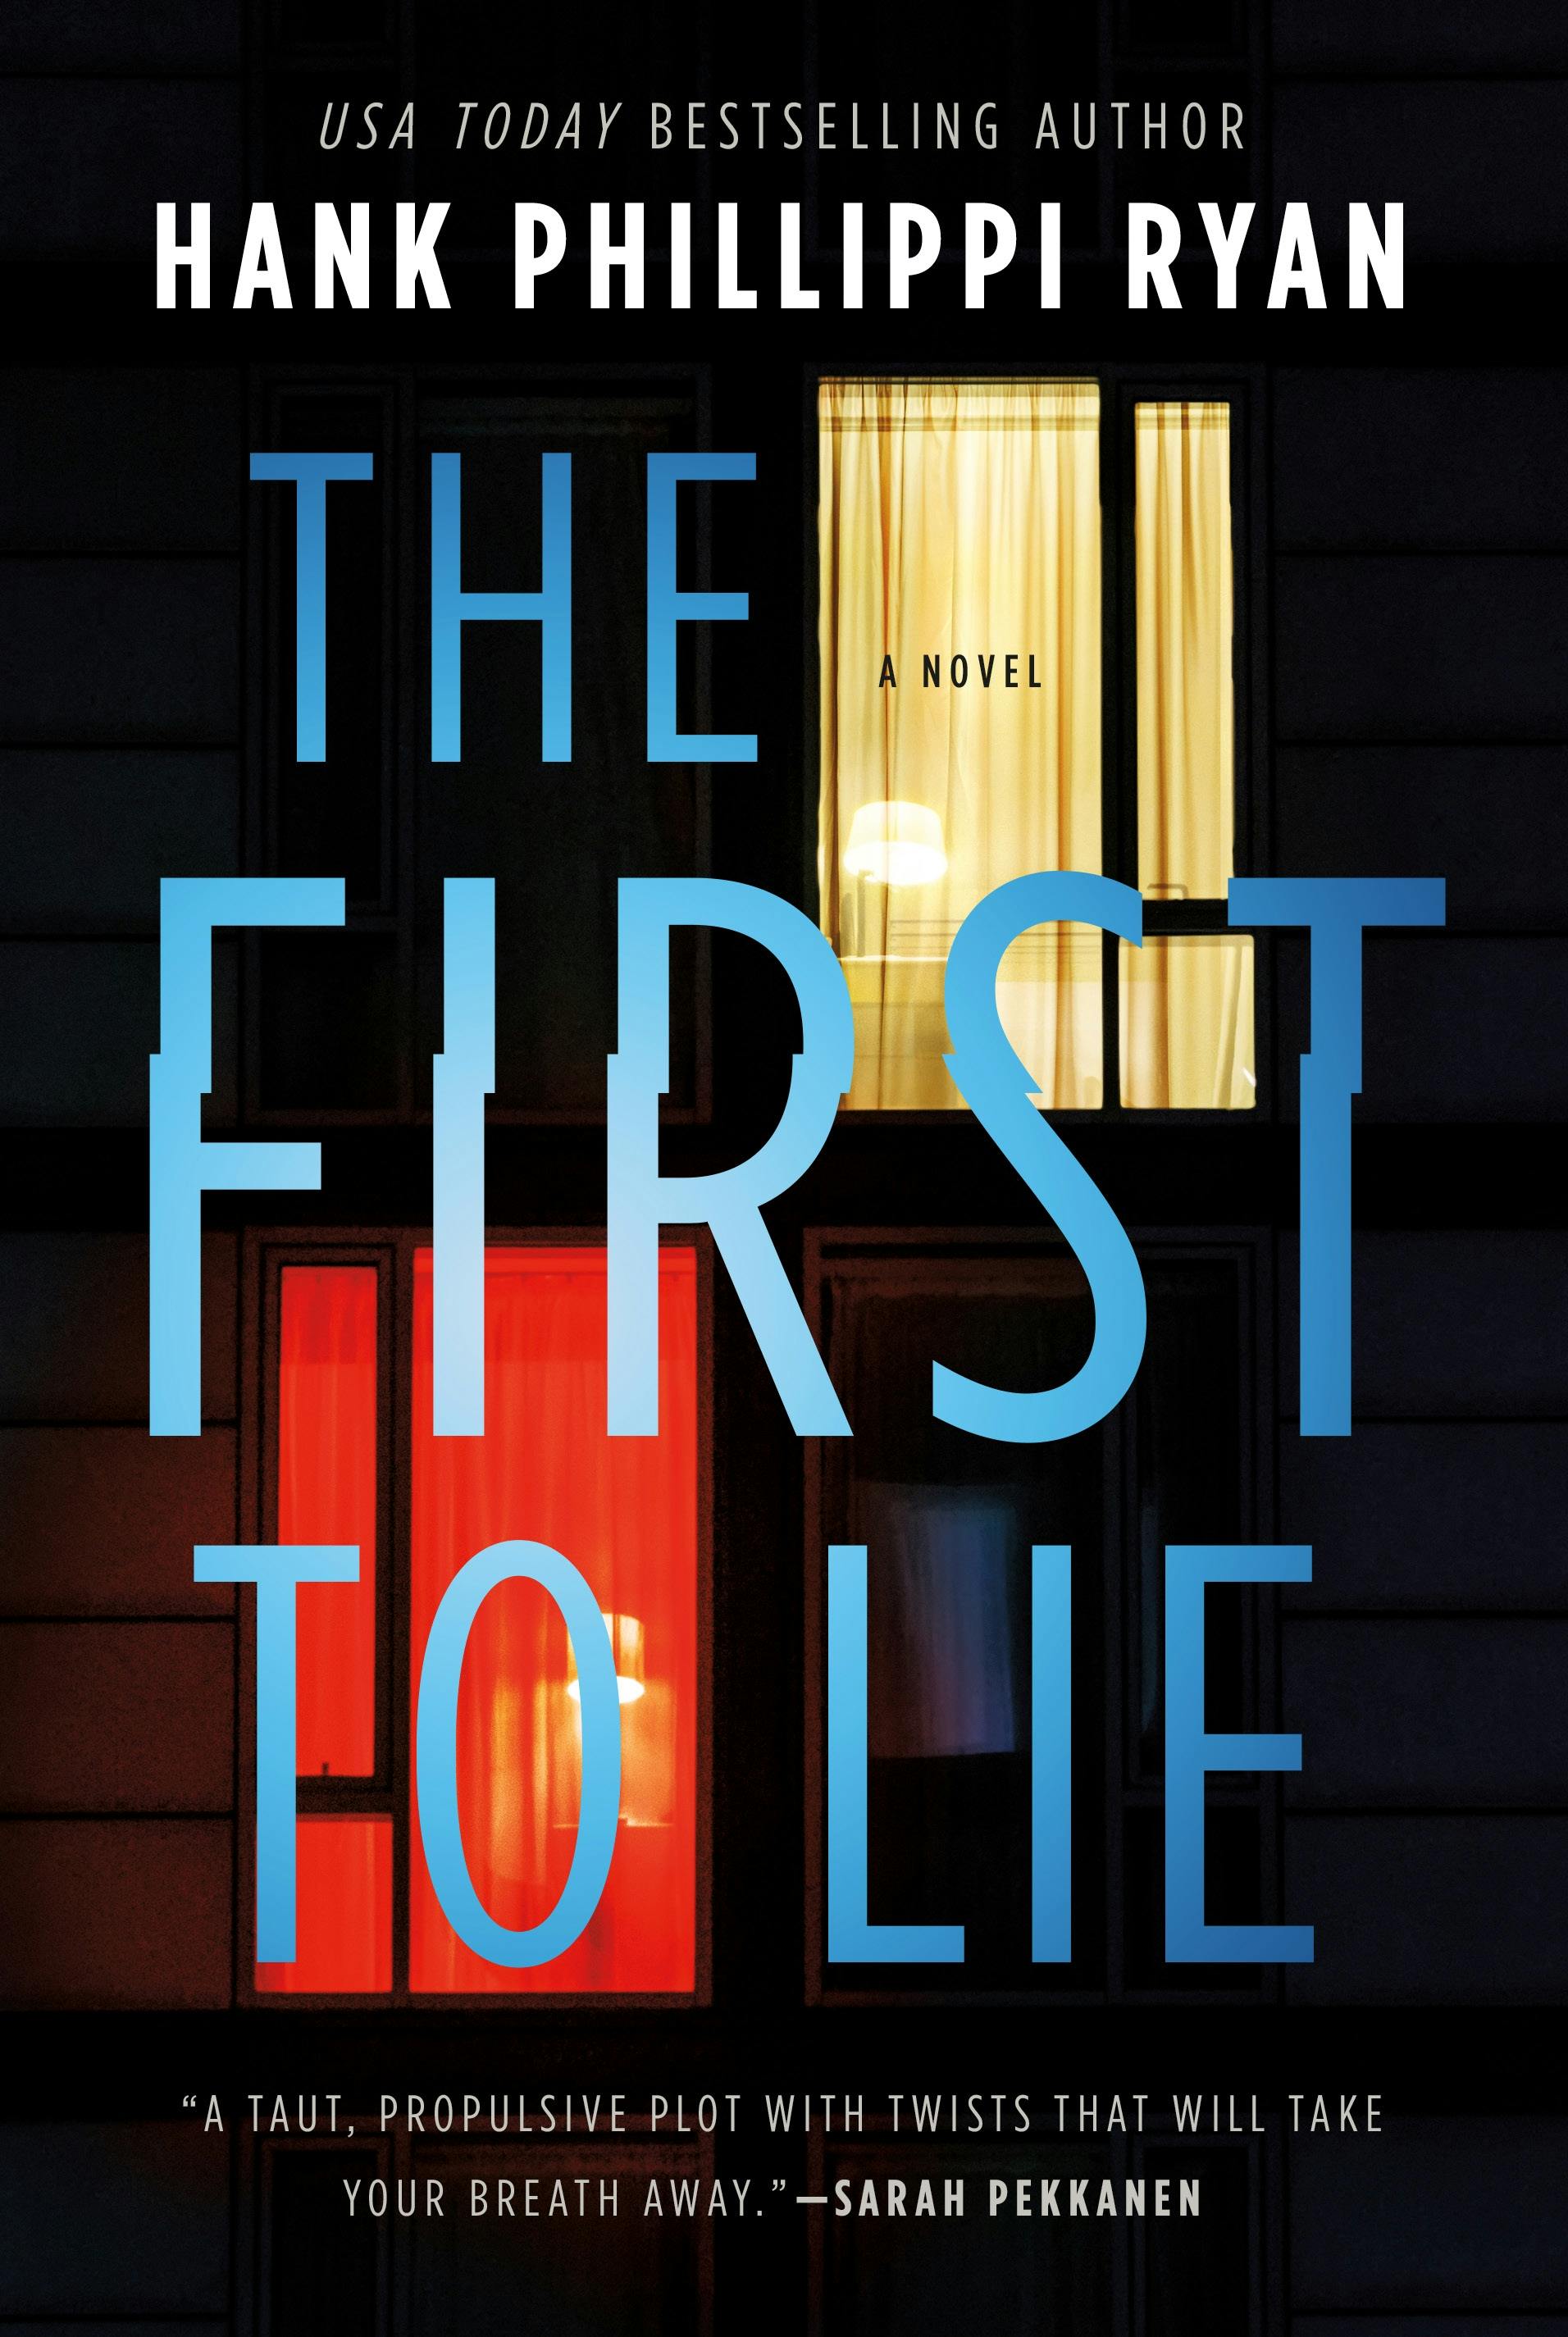 Cover for the book titled as: The First to Lie